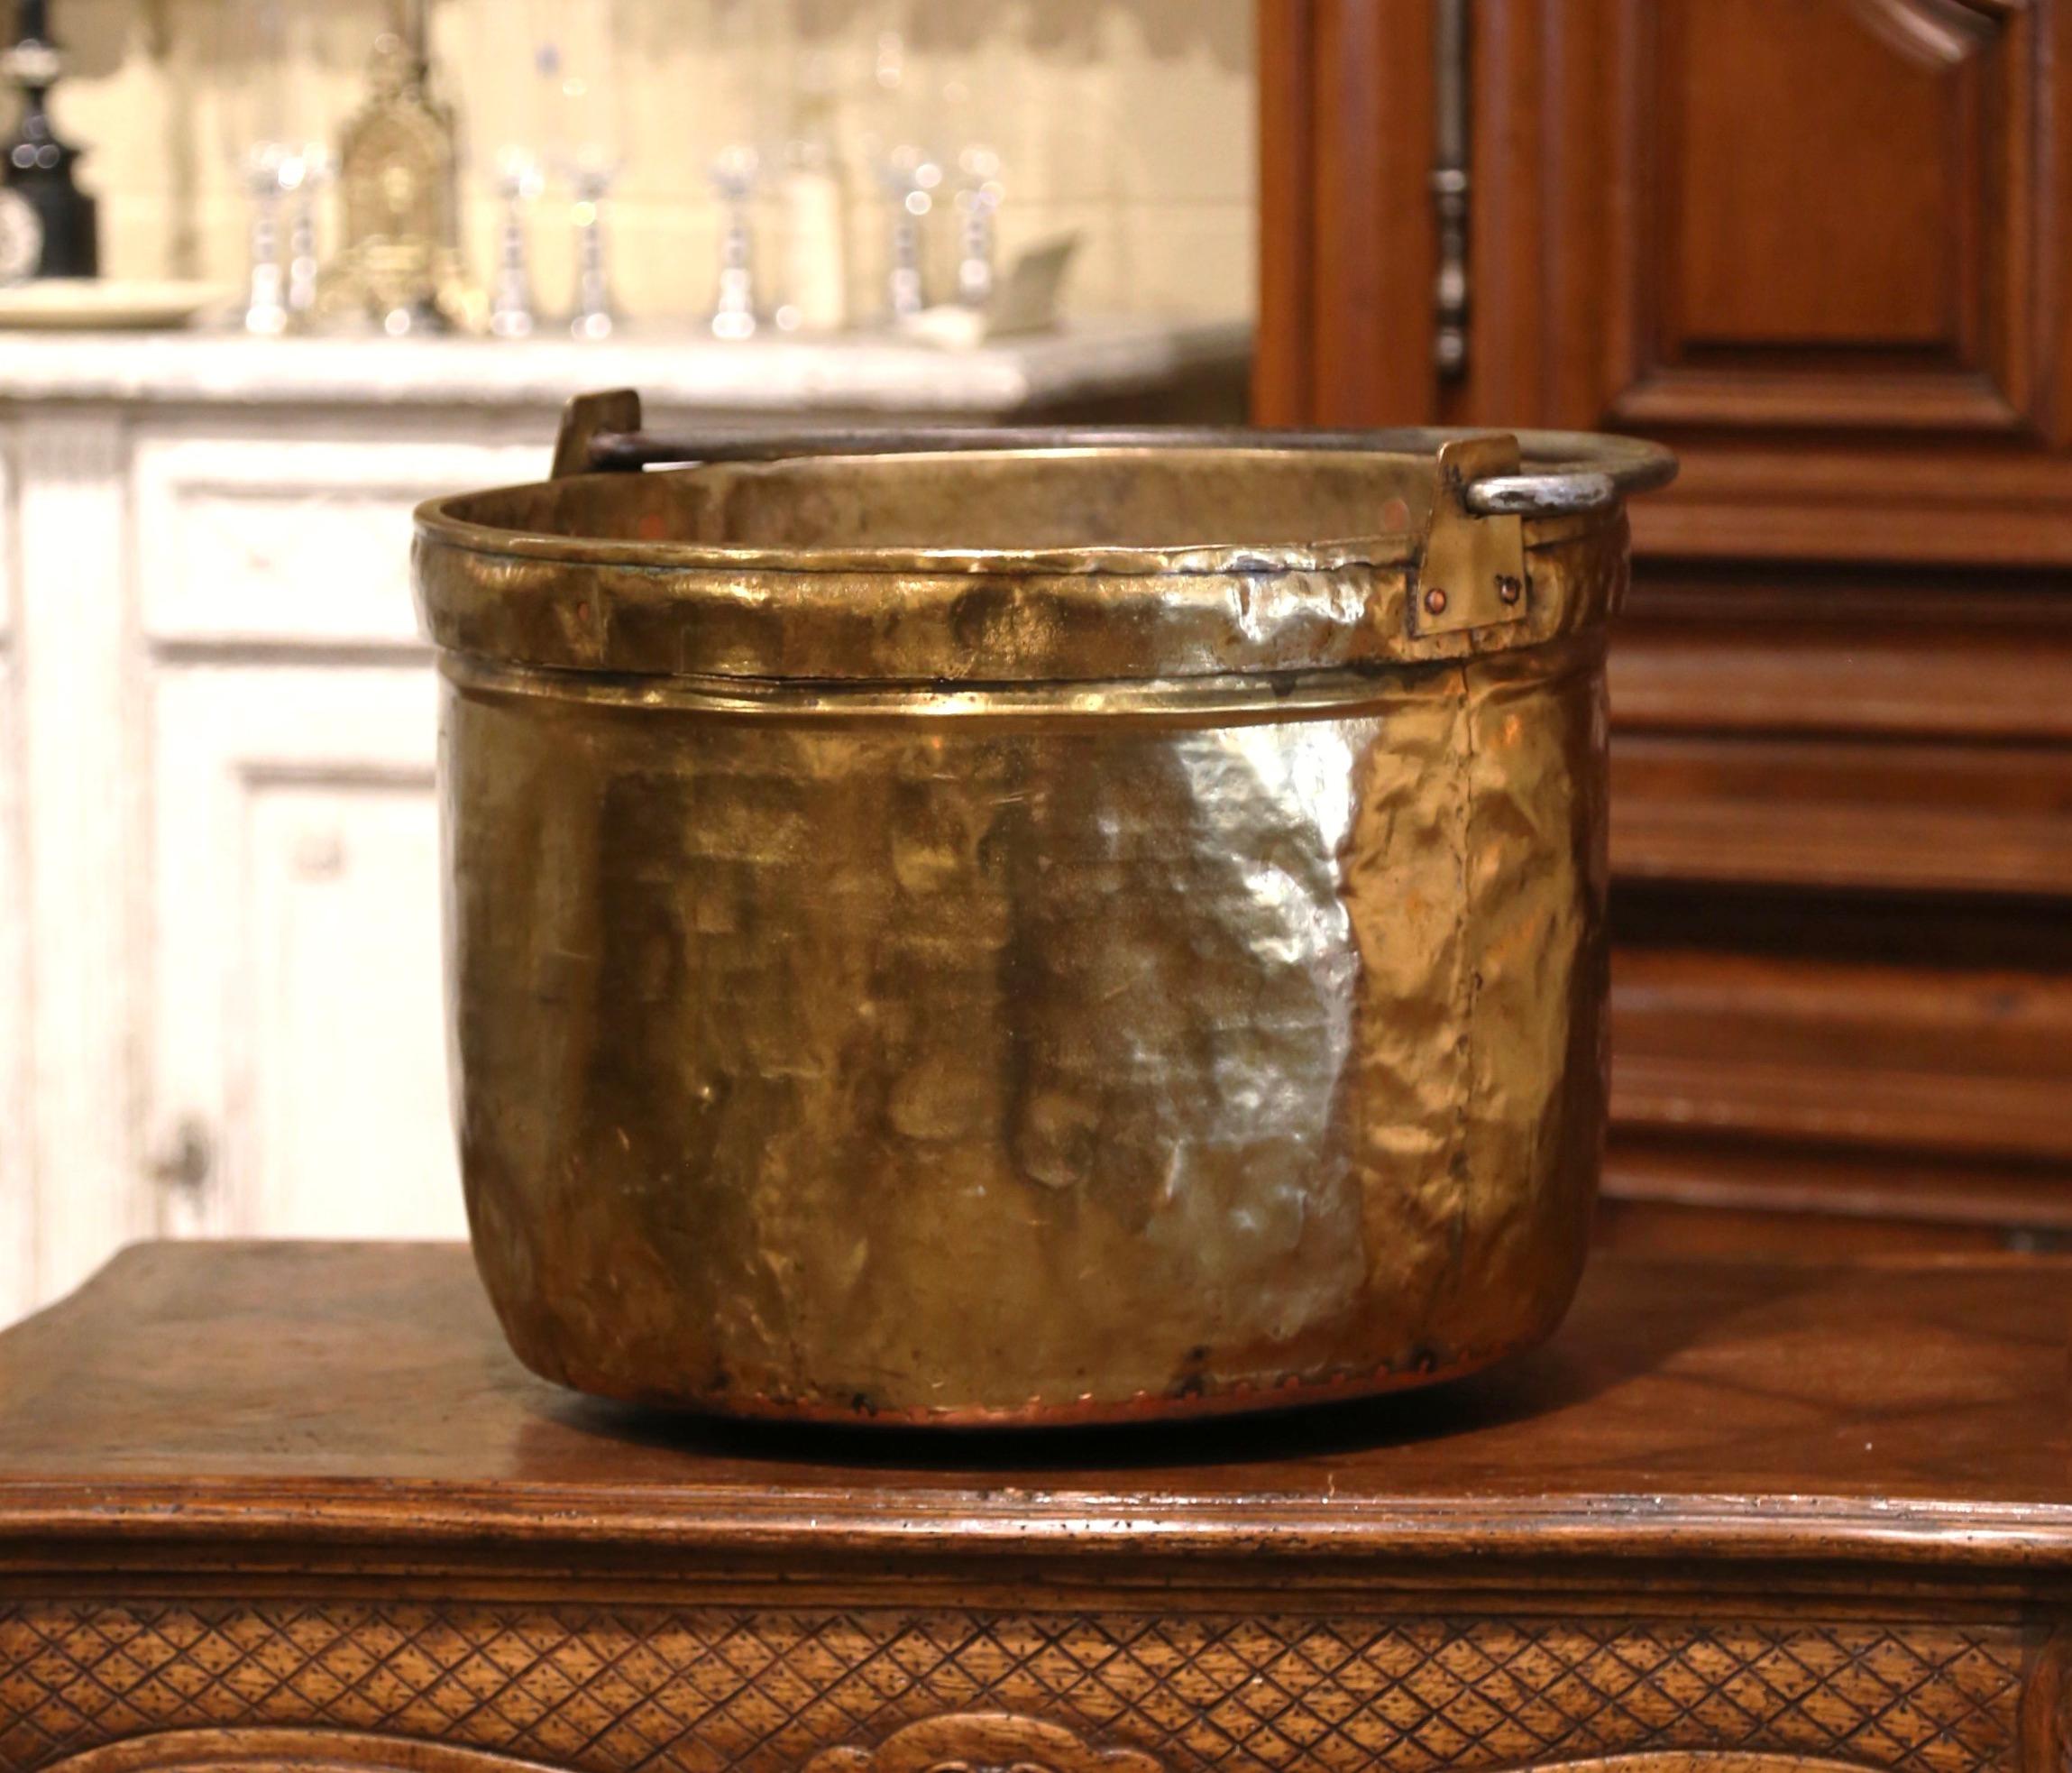 Bring an authentic French countryside touch to your kitchen with this large antique kindling pot. Crafted in Normandy, France, circa 1870, the important cache pot is round in shape and dressed with a wrought iron handle attached with rivets. The